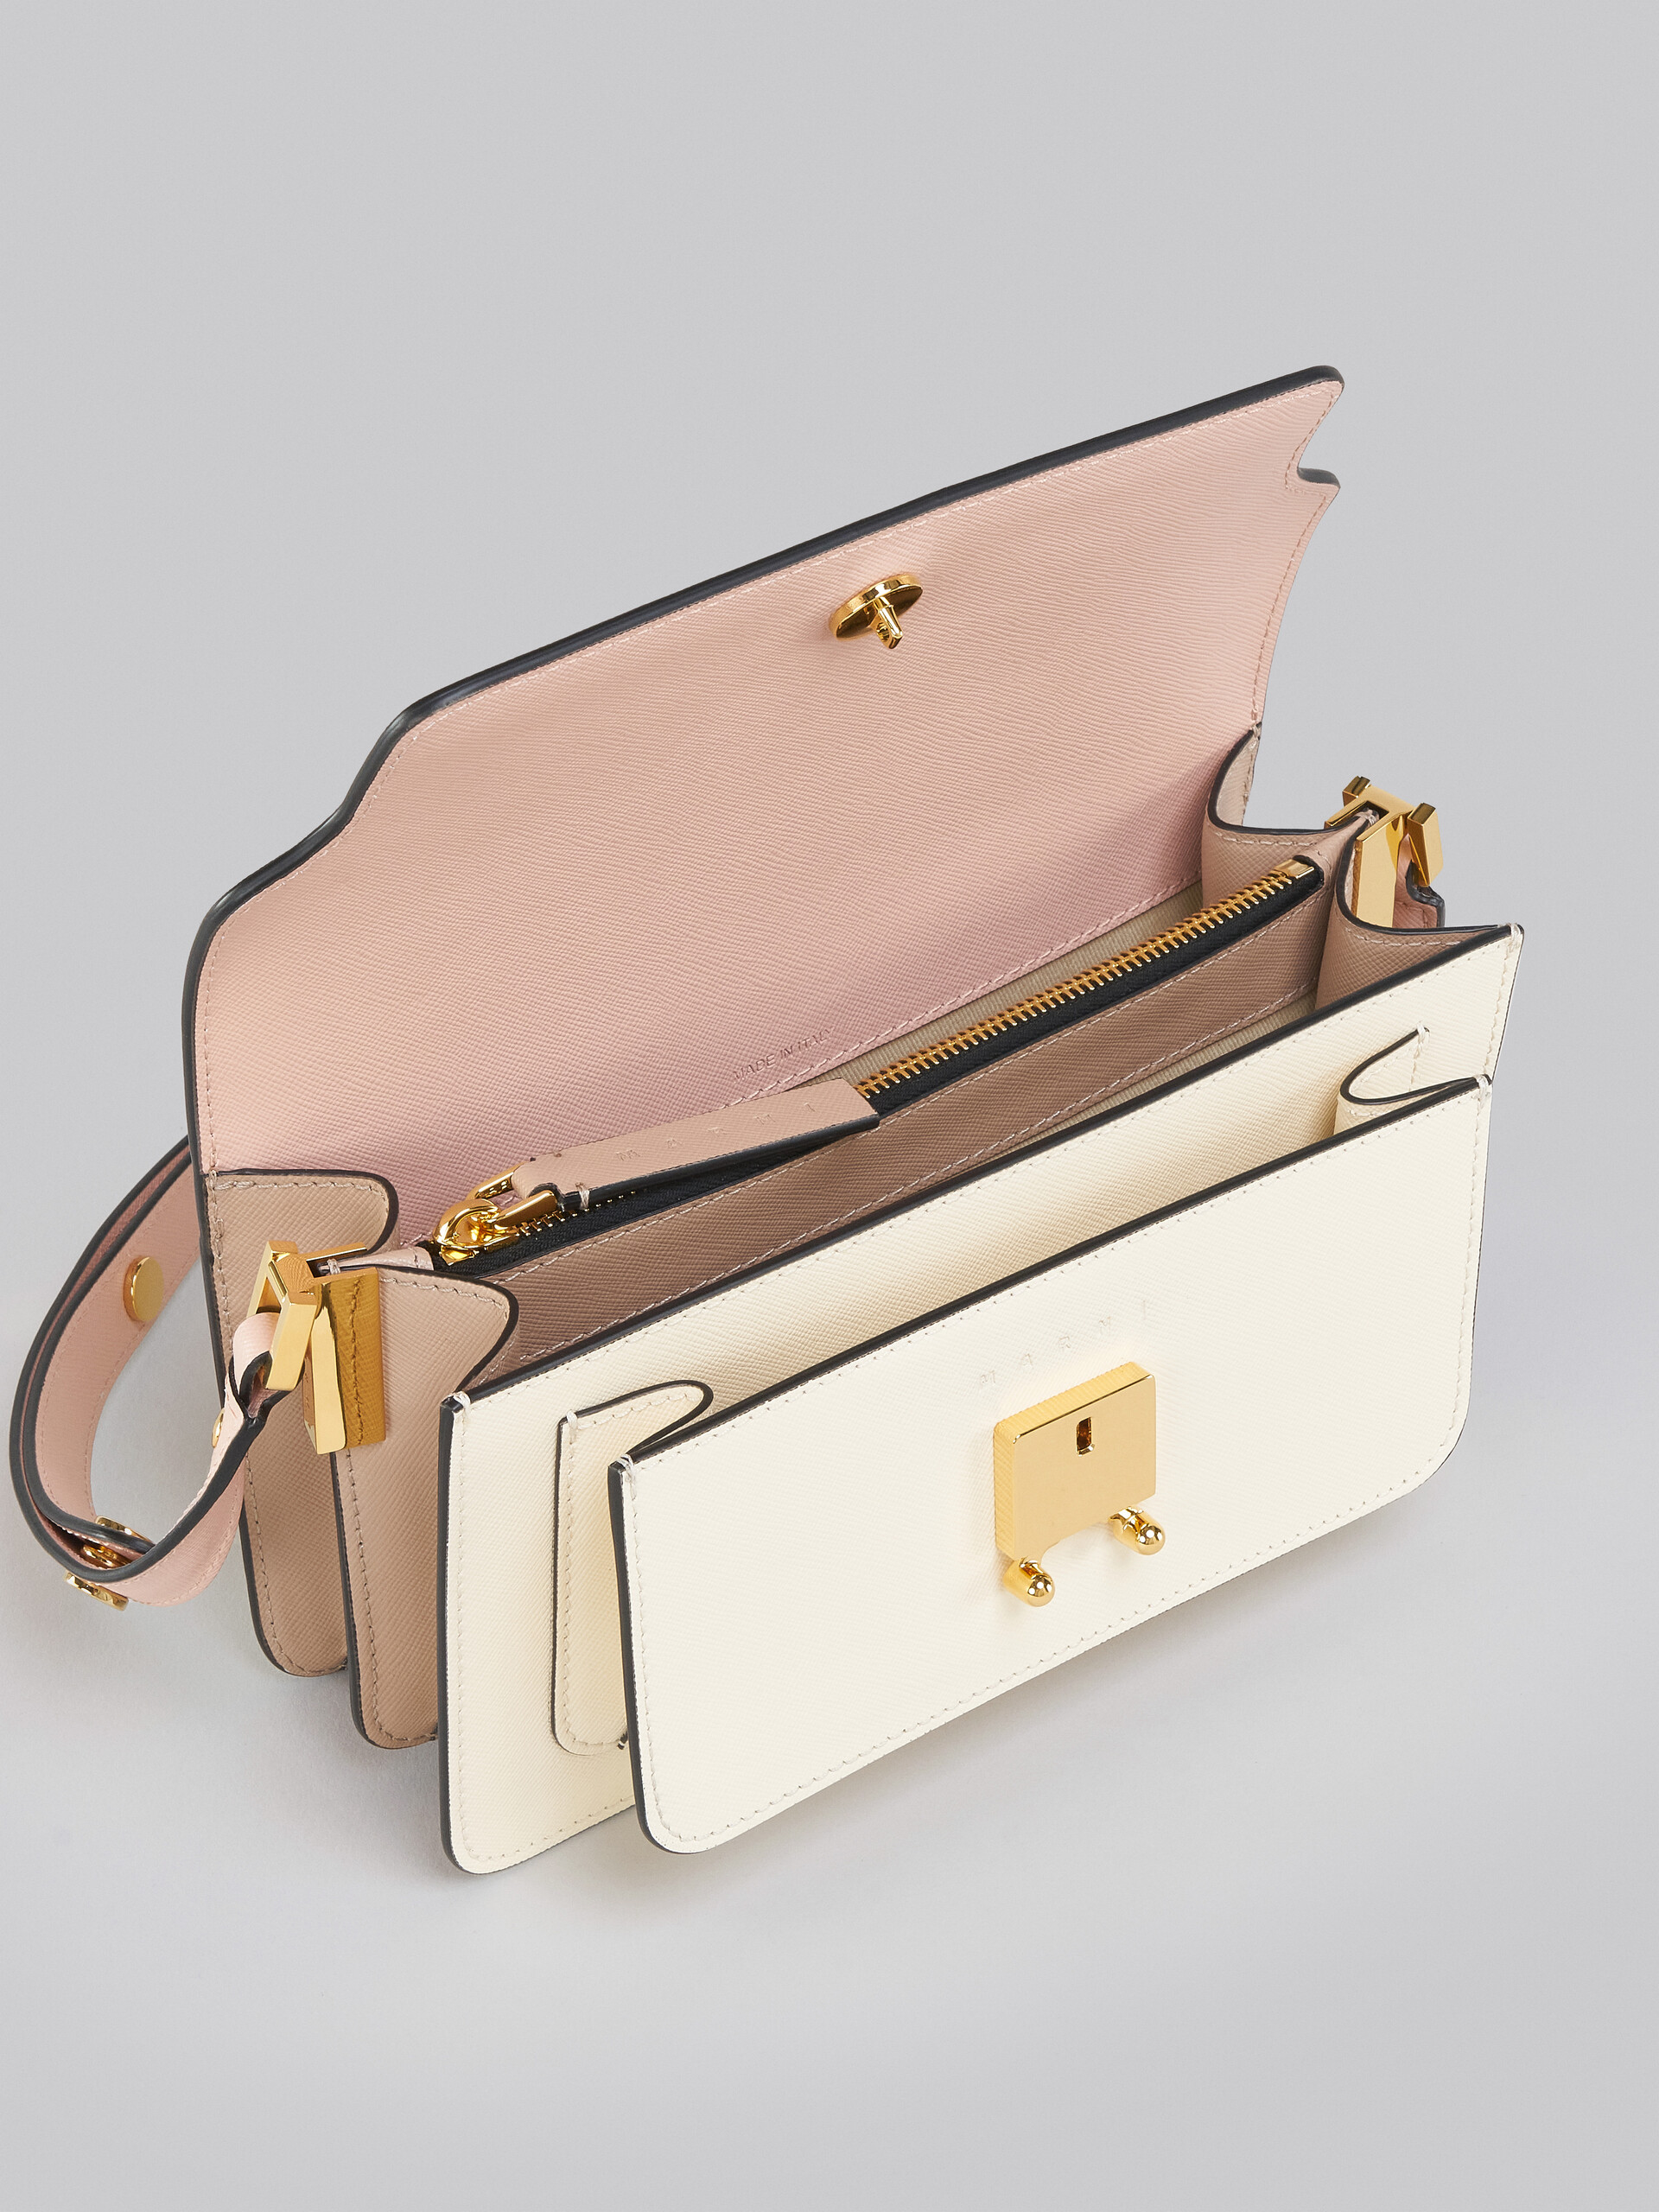 Trunk Bag E/W in pink and white saffiano leather - Shoulder Bags - Image 4